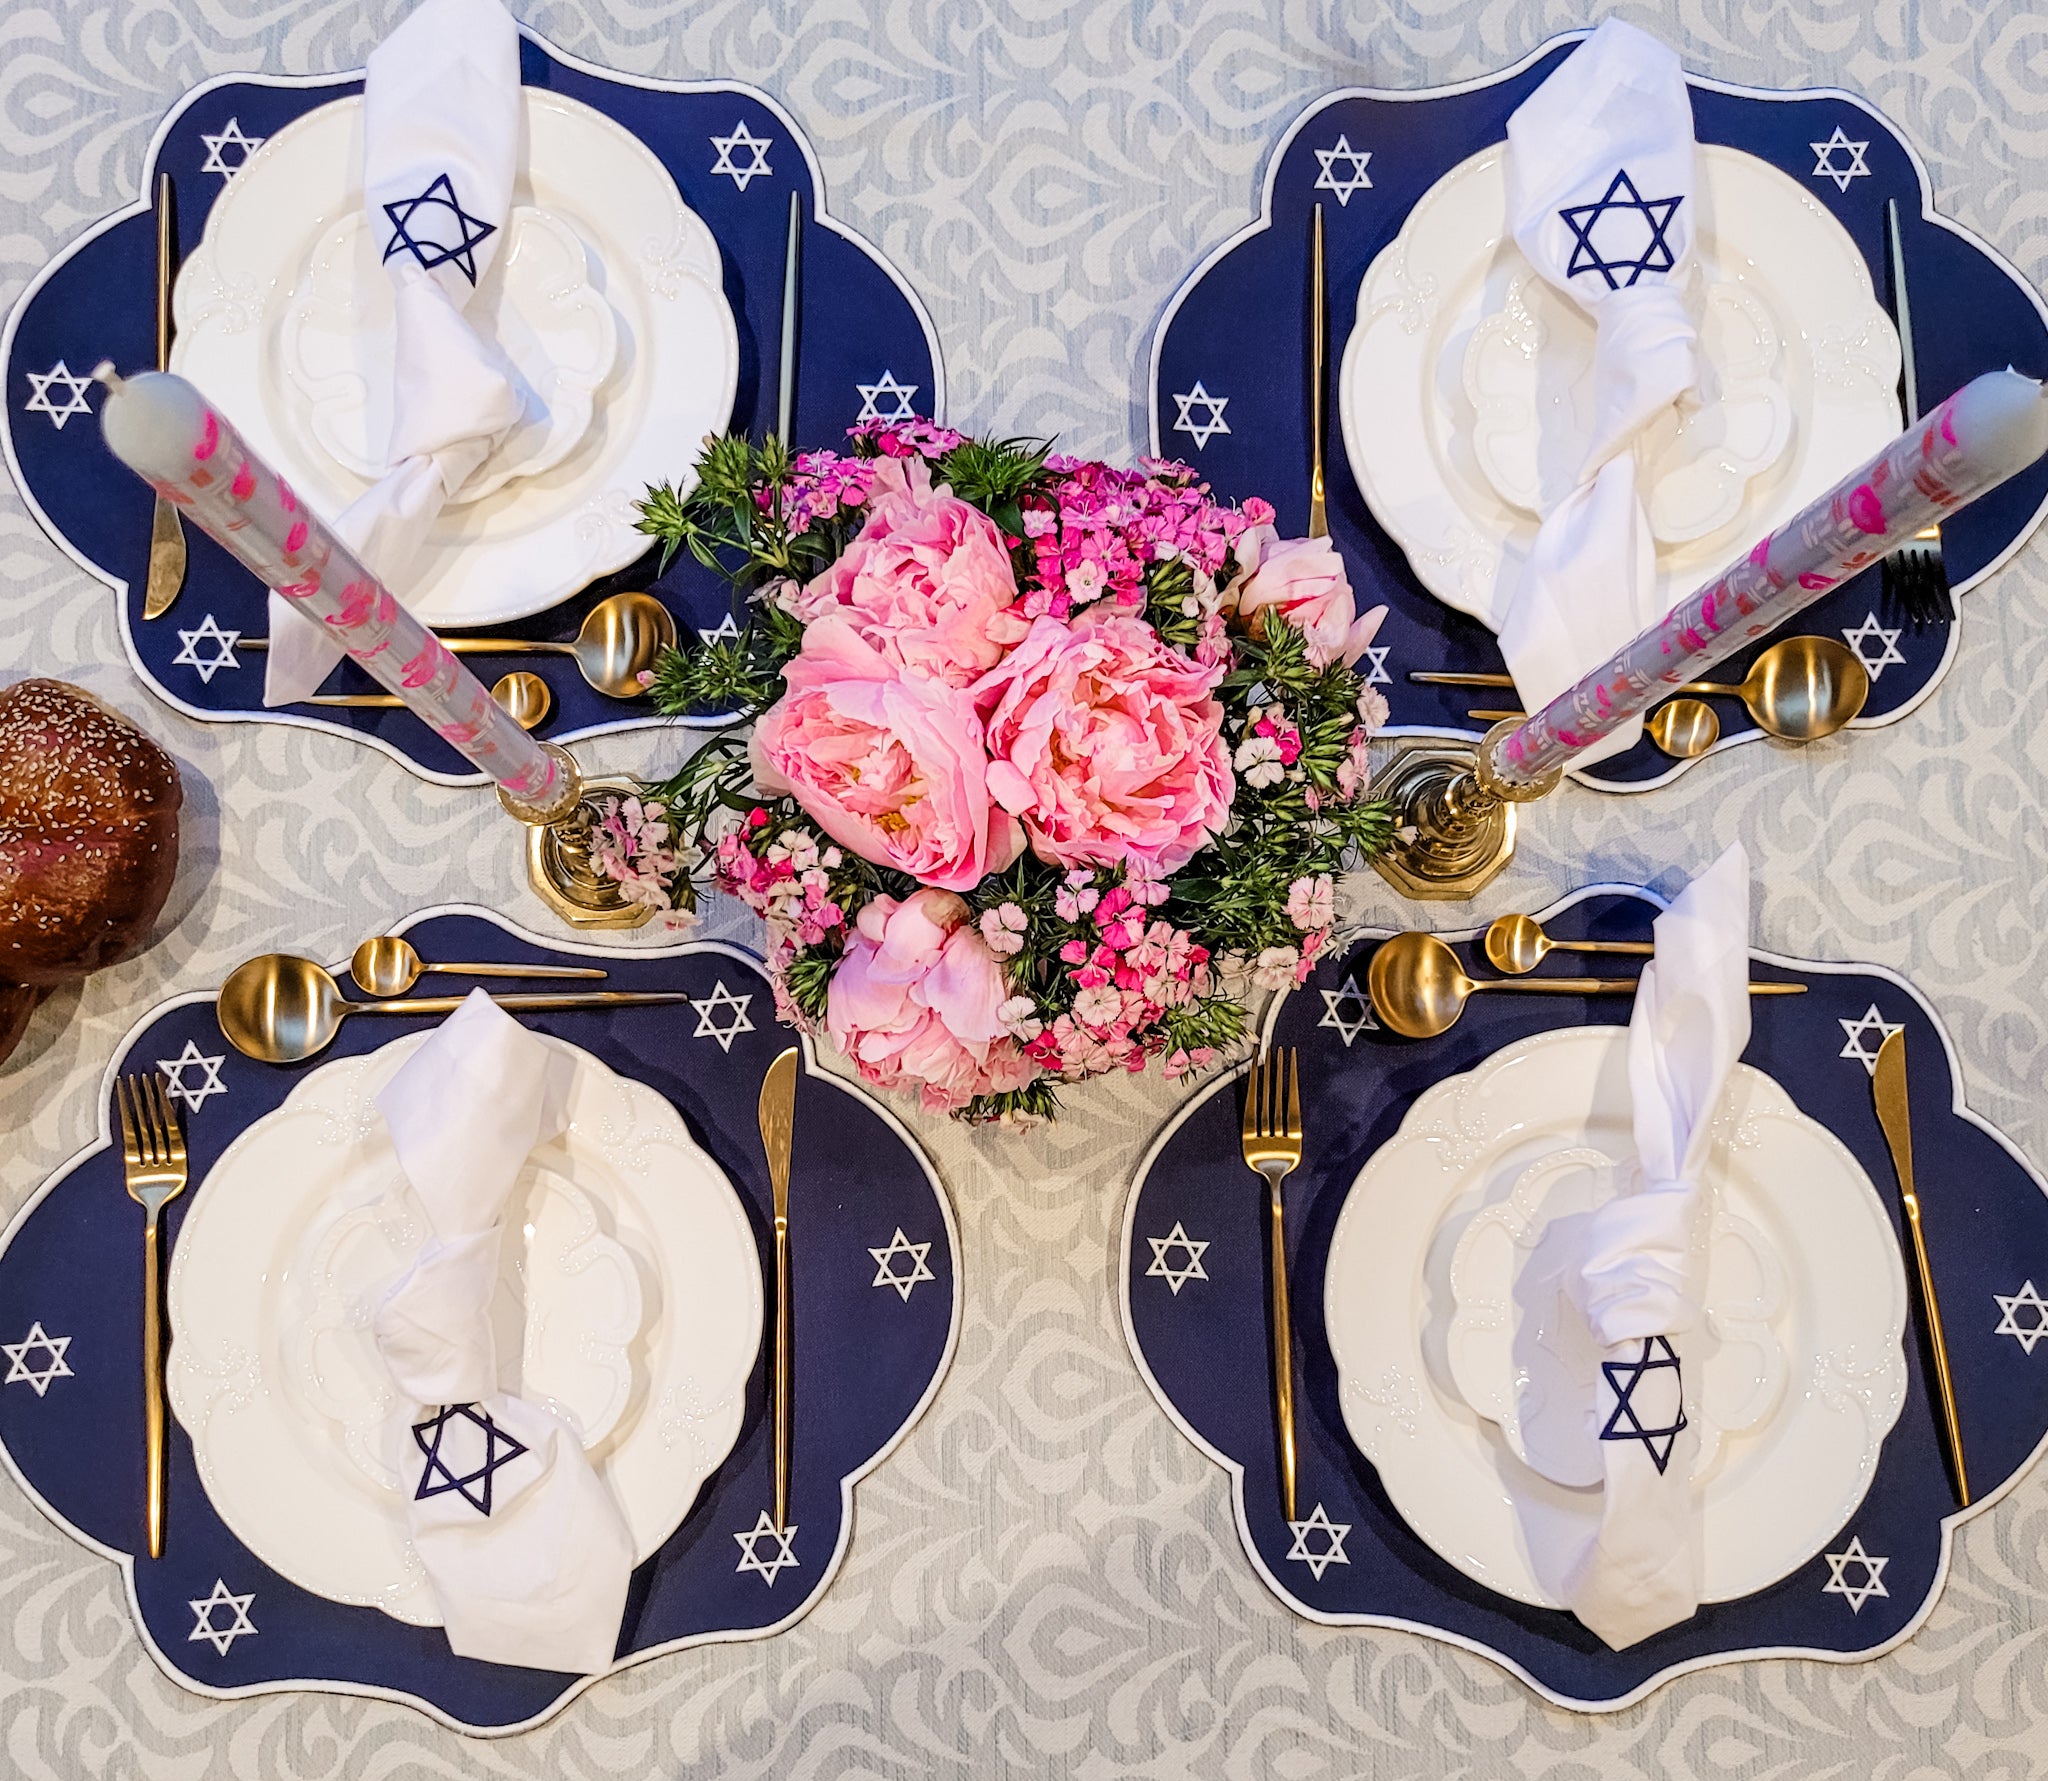 Deborah Collection - Stars of David Embroidered Placemats & Napkin Sets (4 placemats, 4 napkins)